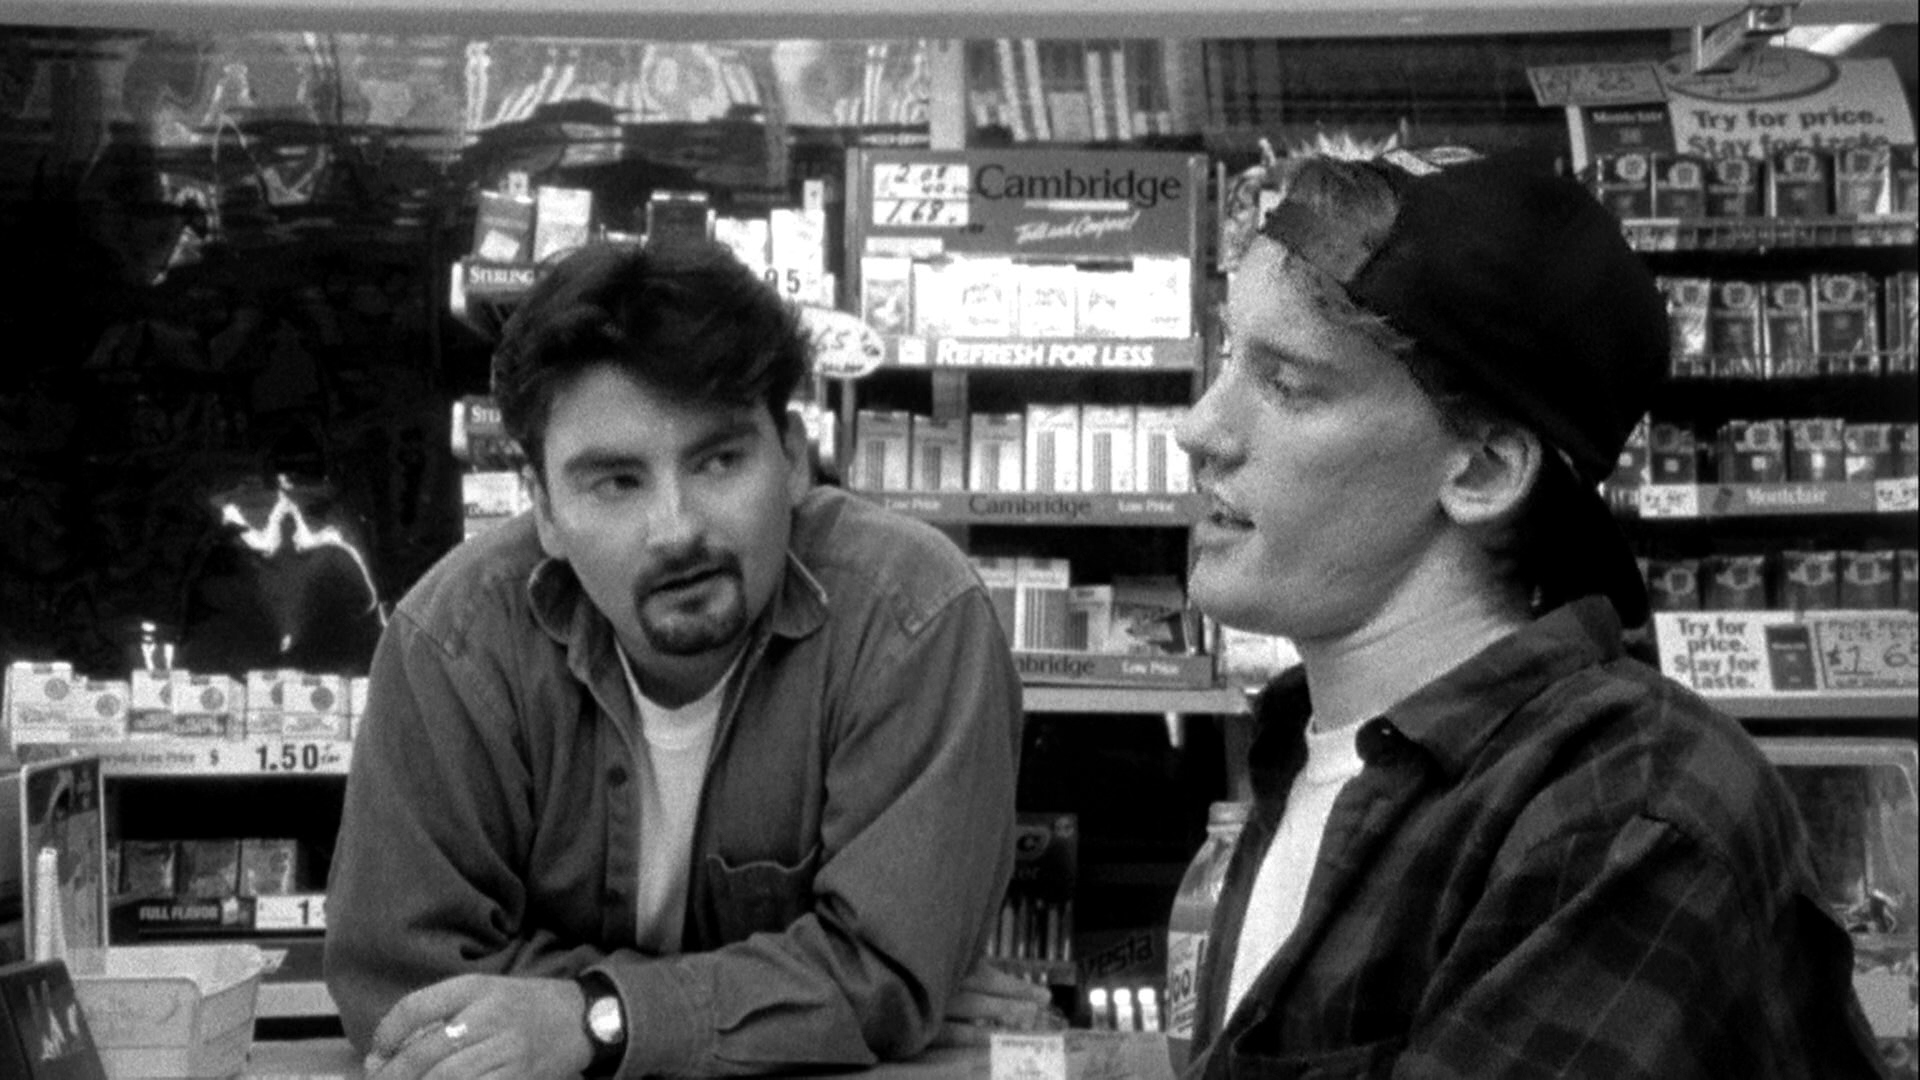 Clerks (1994) - Rarely does a movie perfectly capture the time and place in which it was shot, Clerks is one of those films. Filmed in Leonardo, New Jersey in the mid 1990s, it deals with the time in like when you have to sh*t or get off the pot. It follows a day in the life of two convenience store clerks as they contemplate spinning their wheels in life, relationships and Star Wars. The film was made for only $27,575 dollars and it was the vehicle that launched writer/director Kevin Smith’s career.